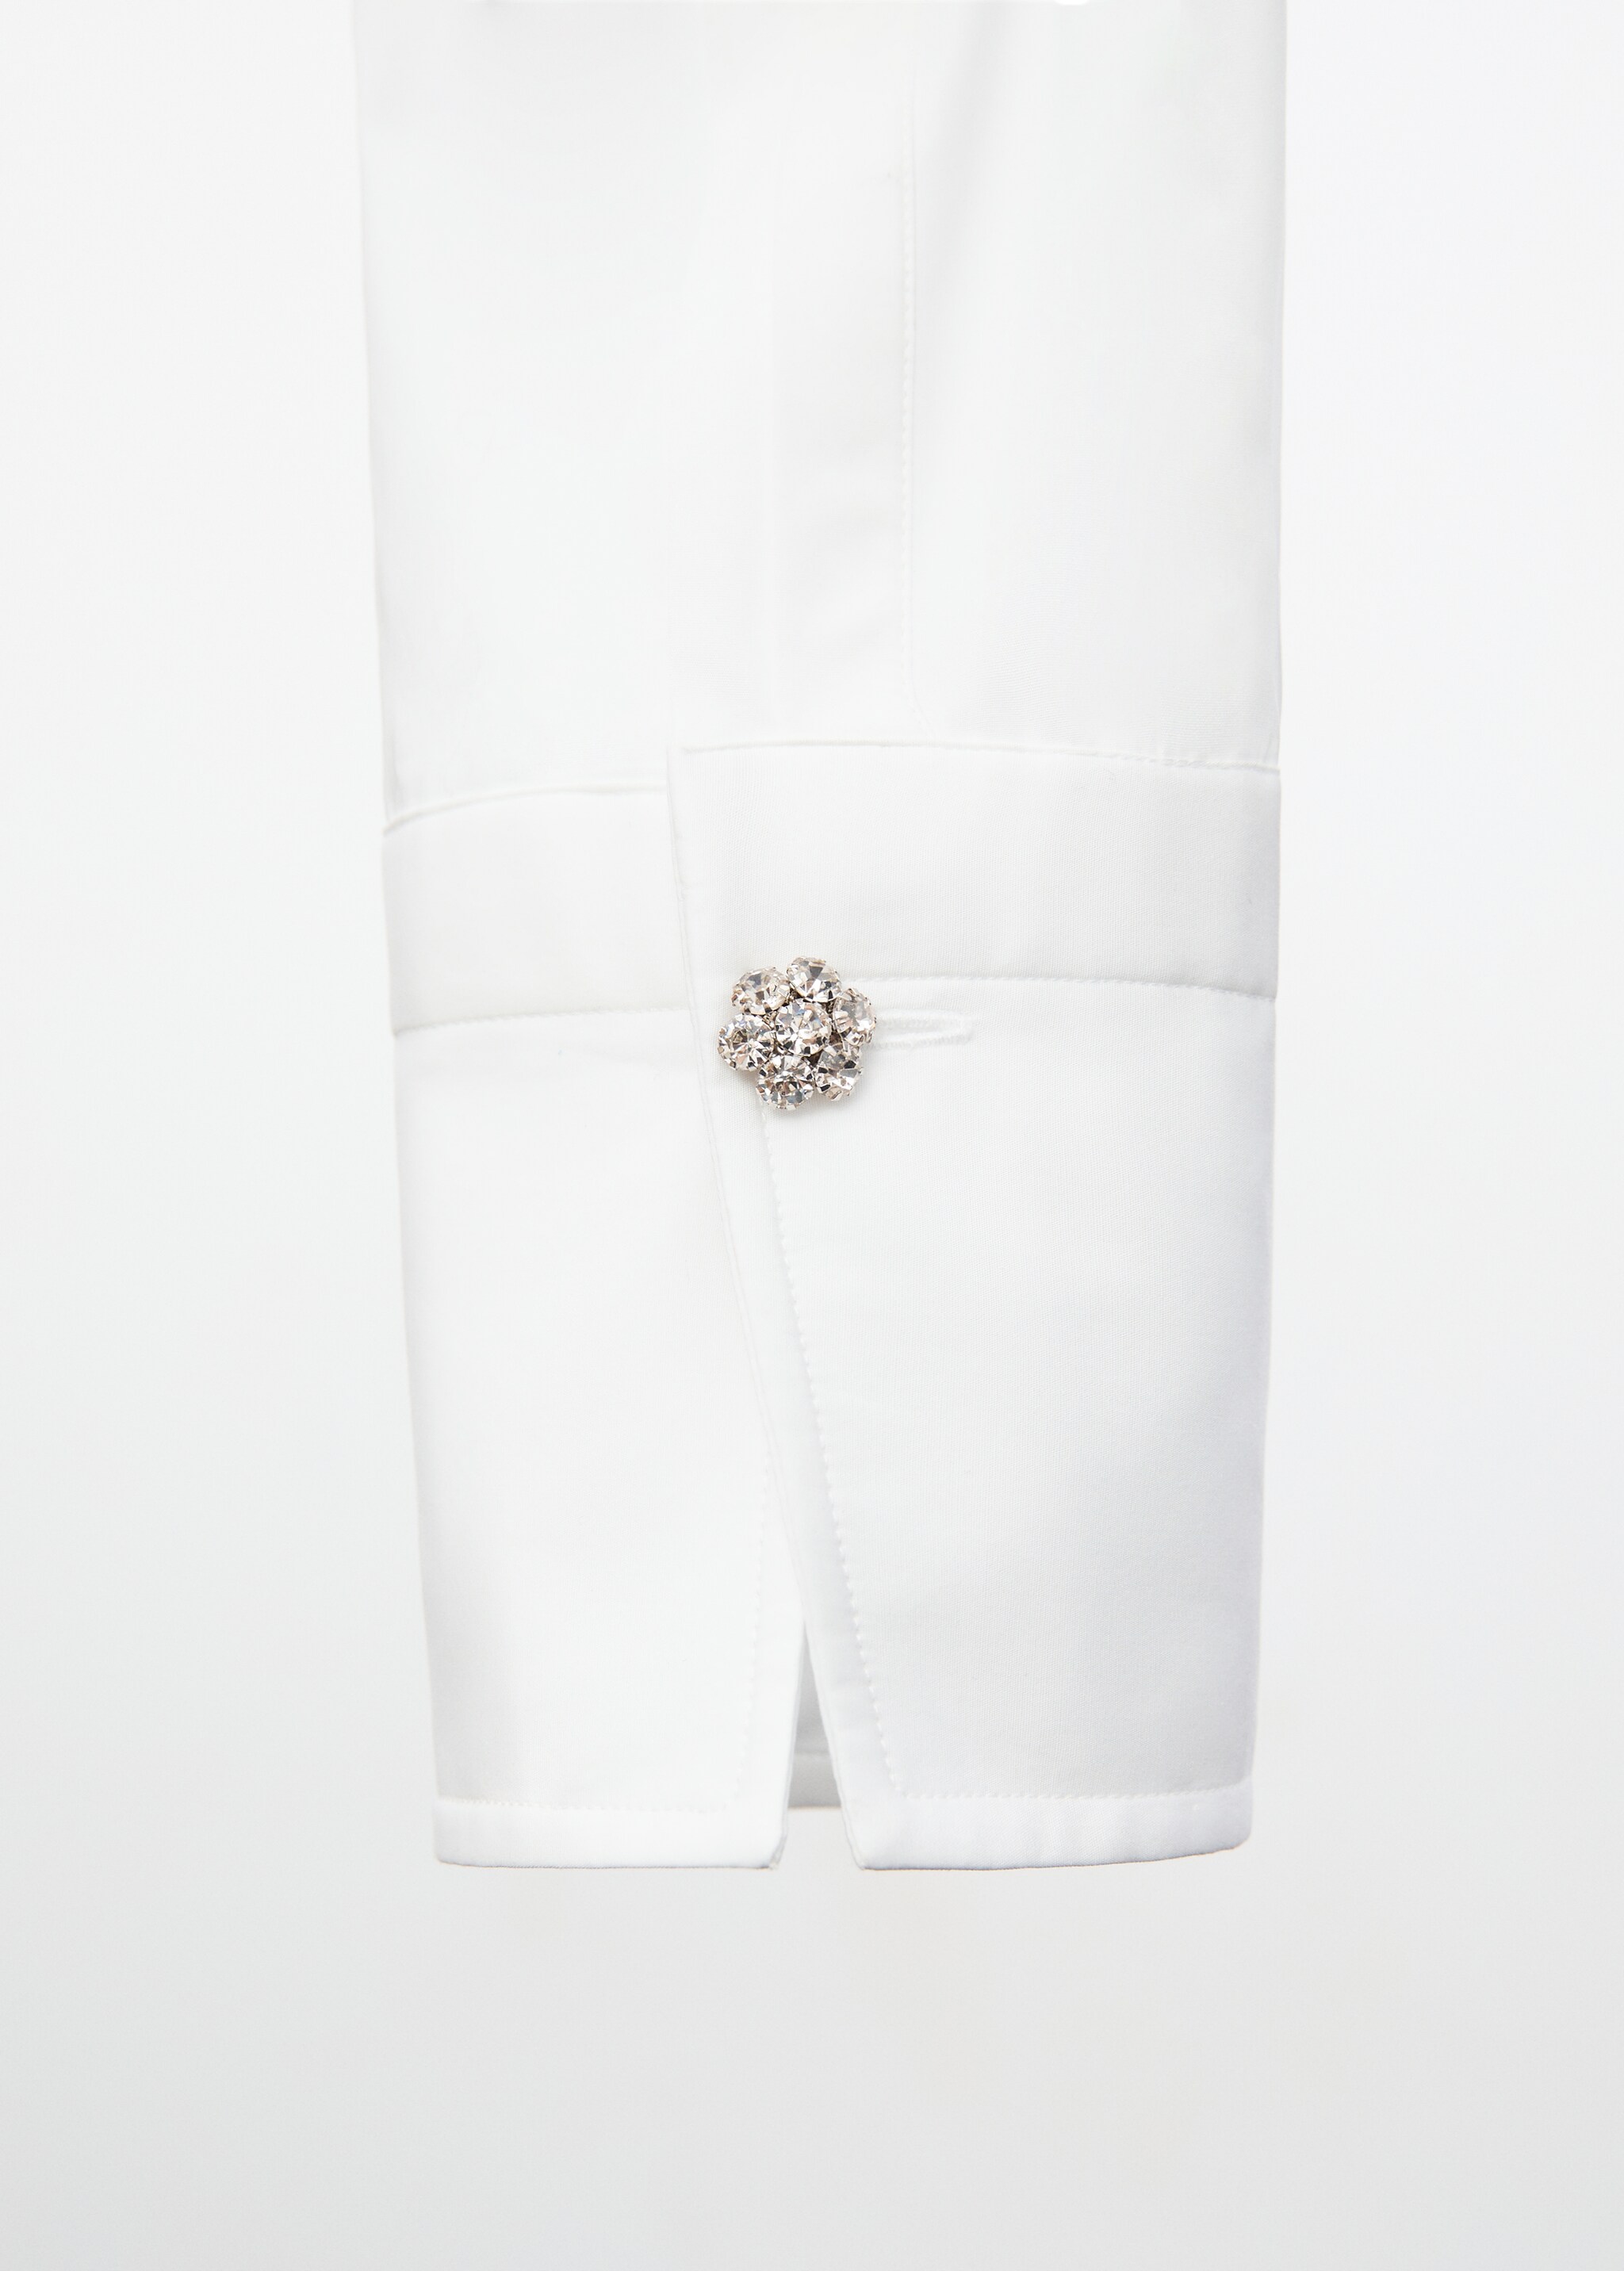 Cotton shirt with jewel buttons - Details of the article 8